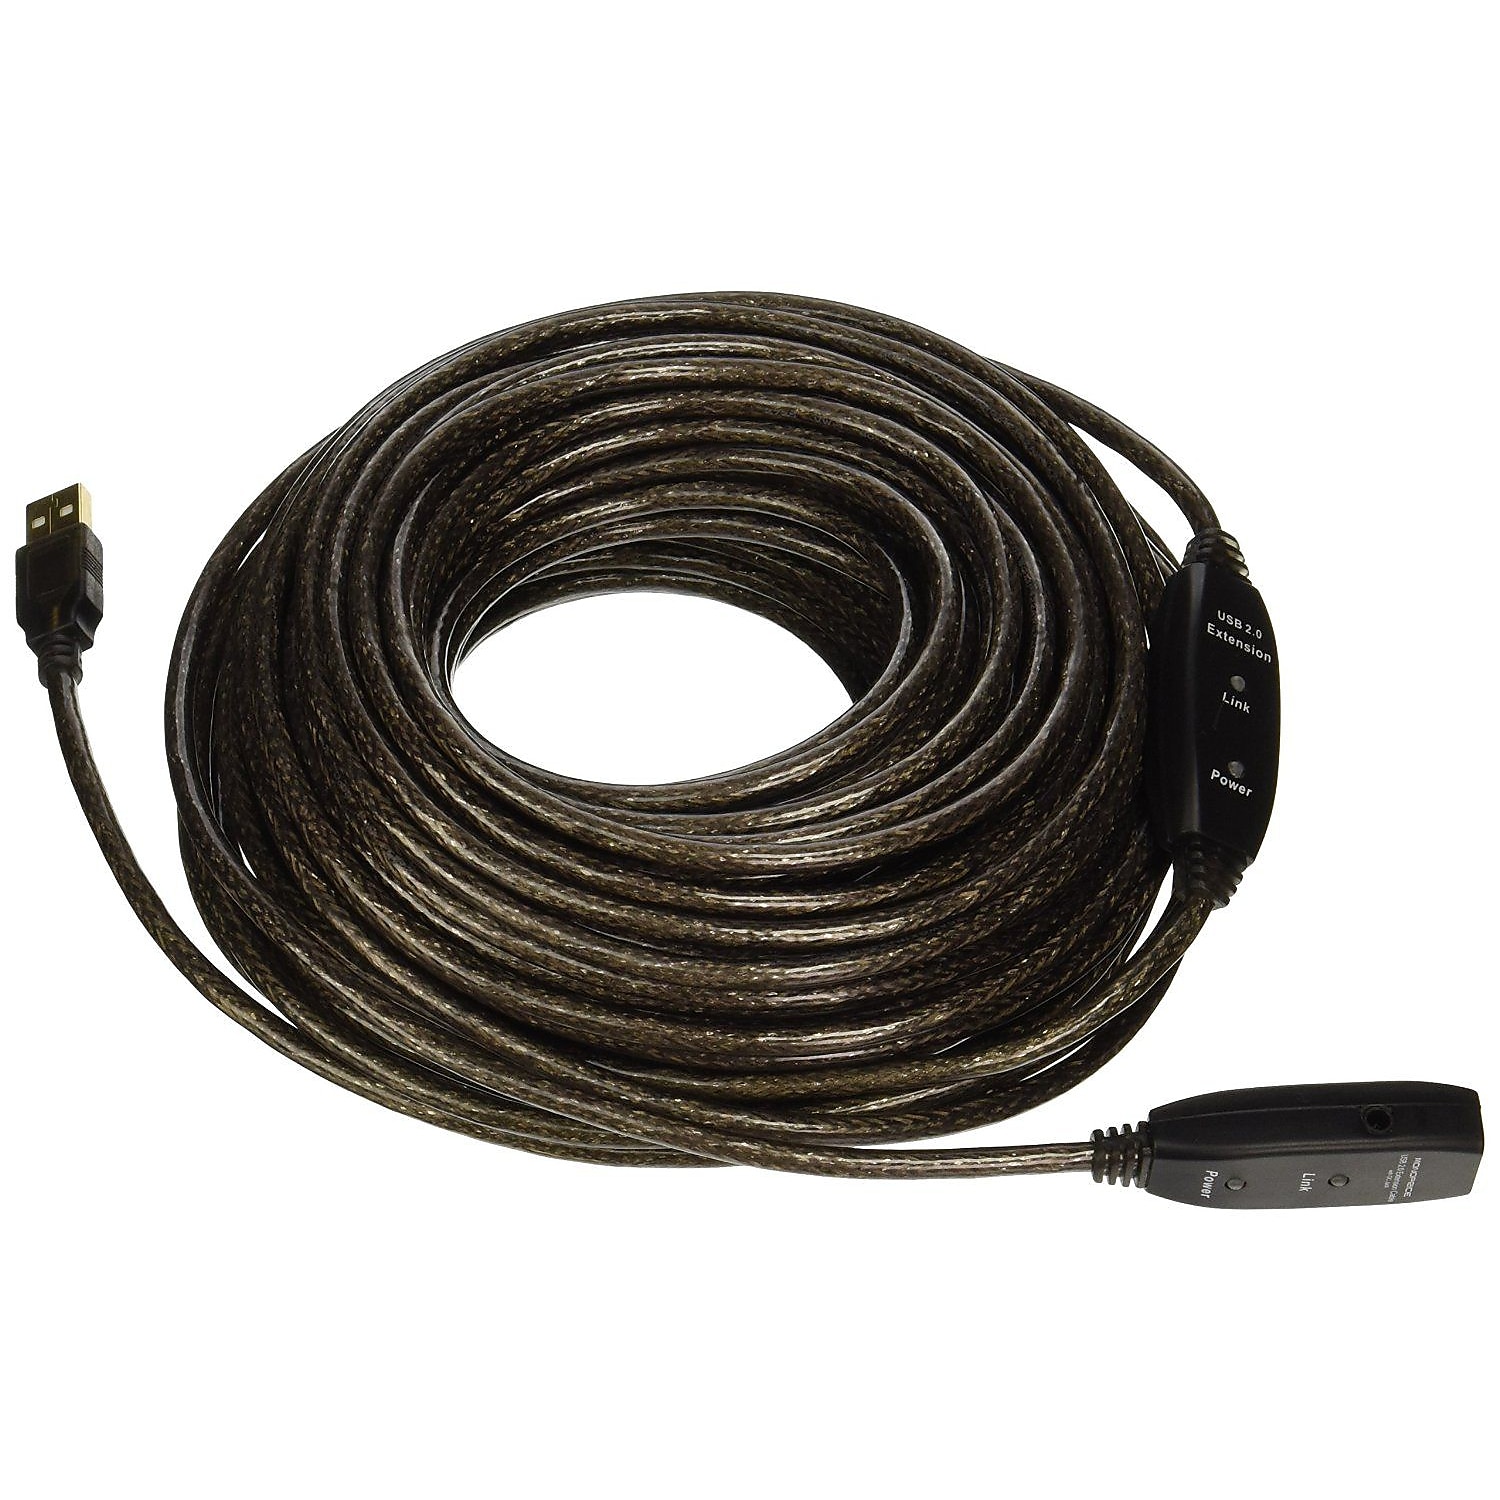 Monoprice USB Data Transfer Cable - image 1 of 3